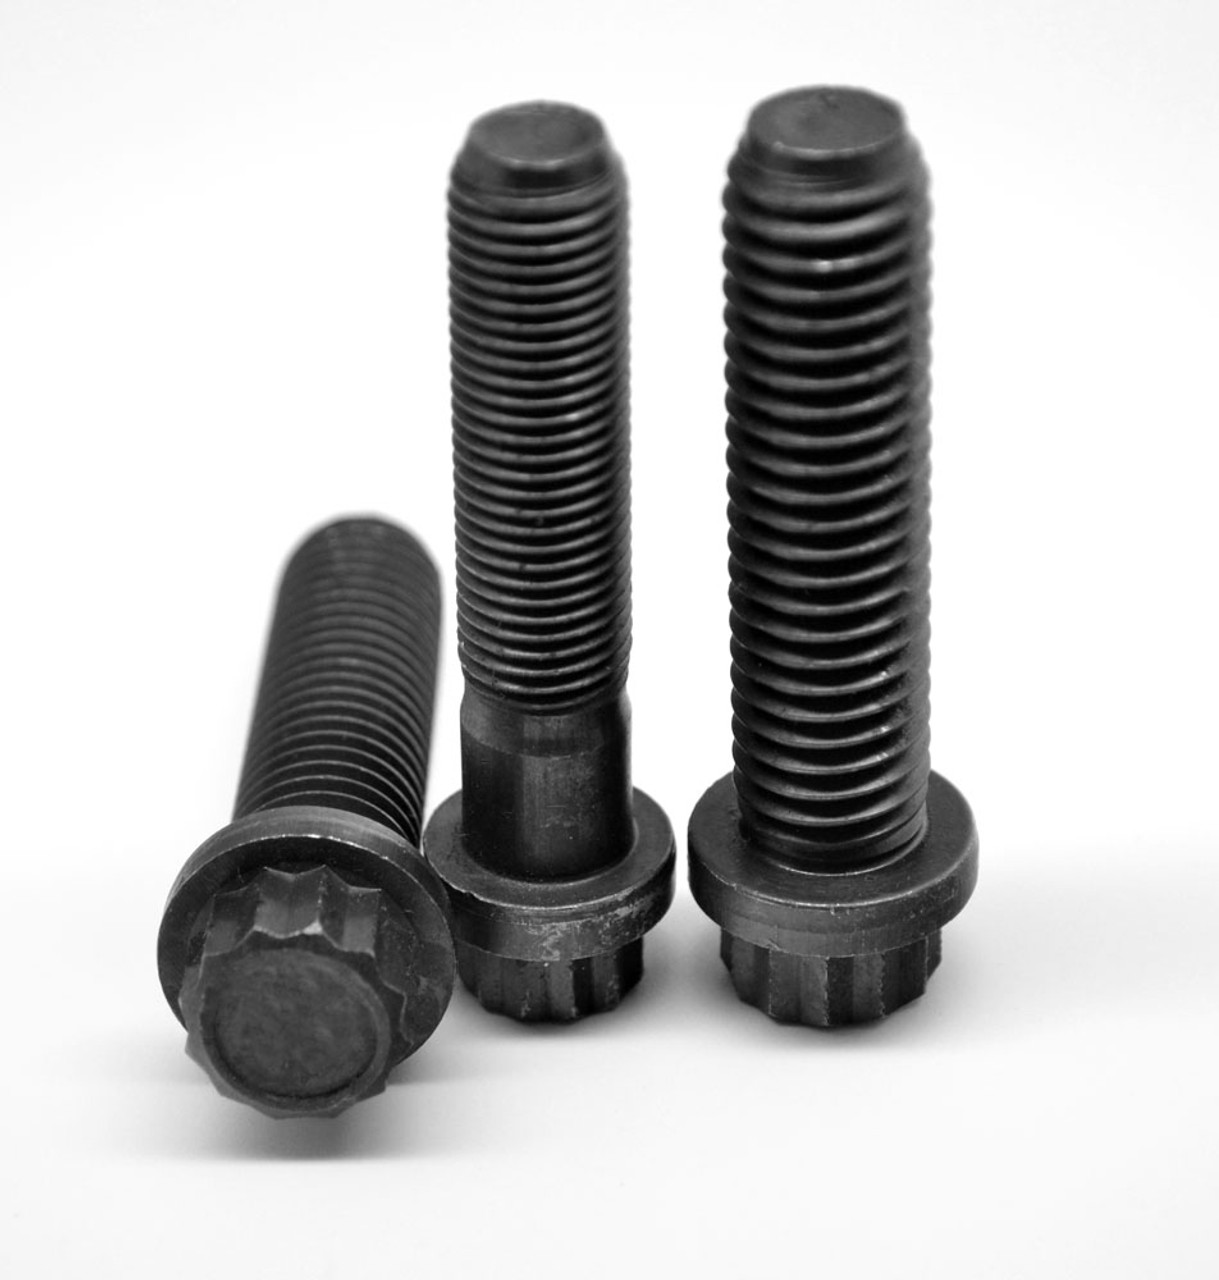 7/16-14 x 1 1/2 Coarse Thread 12-Point Flange Screw Alloy Steel Thermal Black Oxide